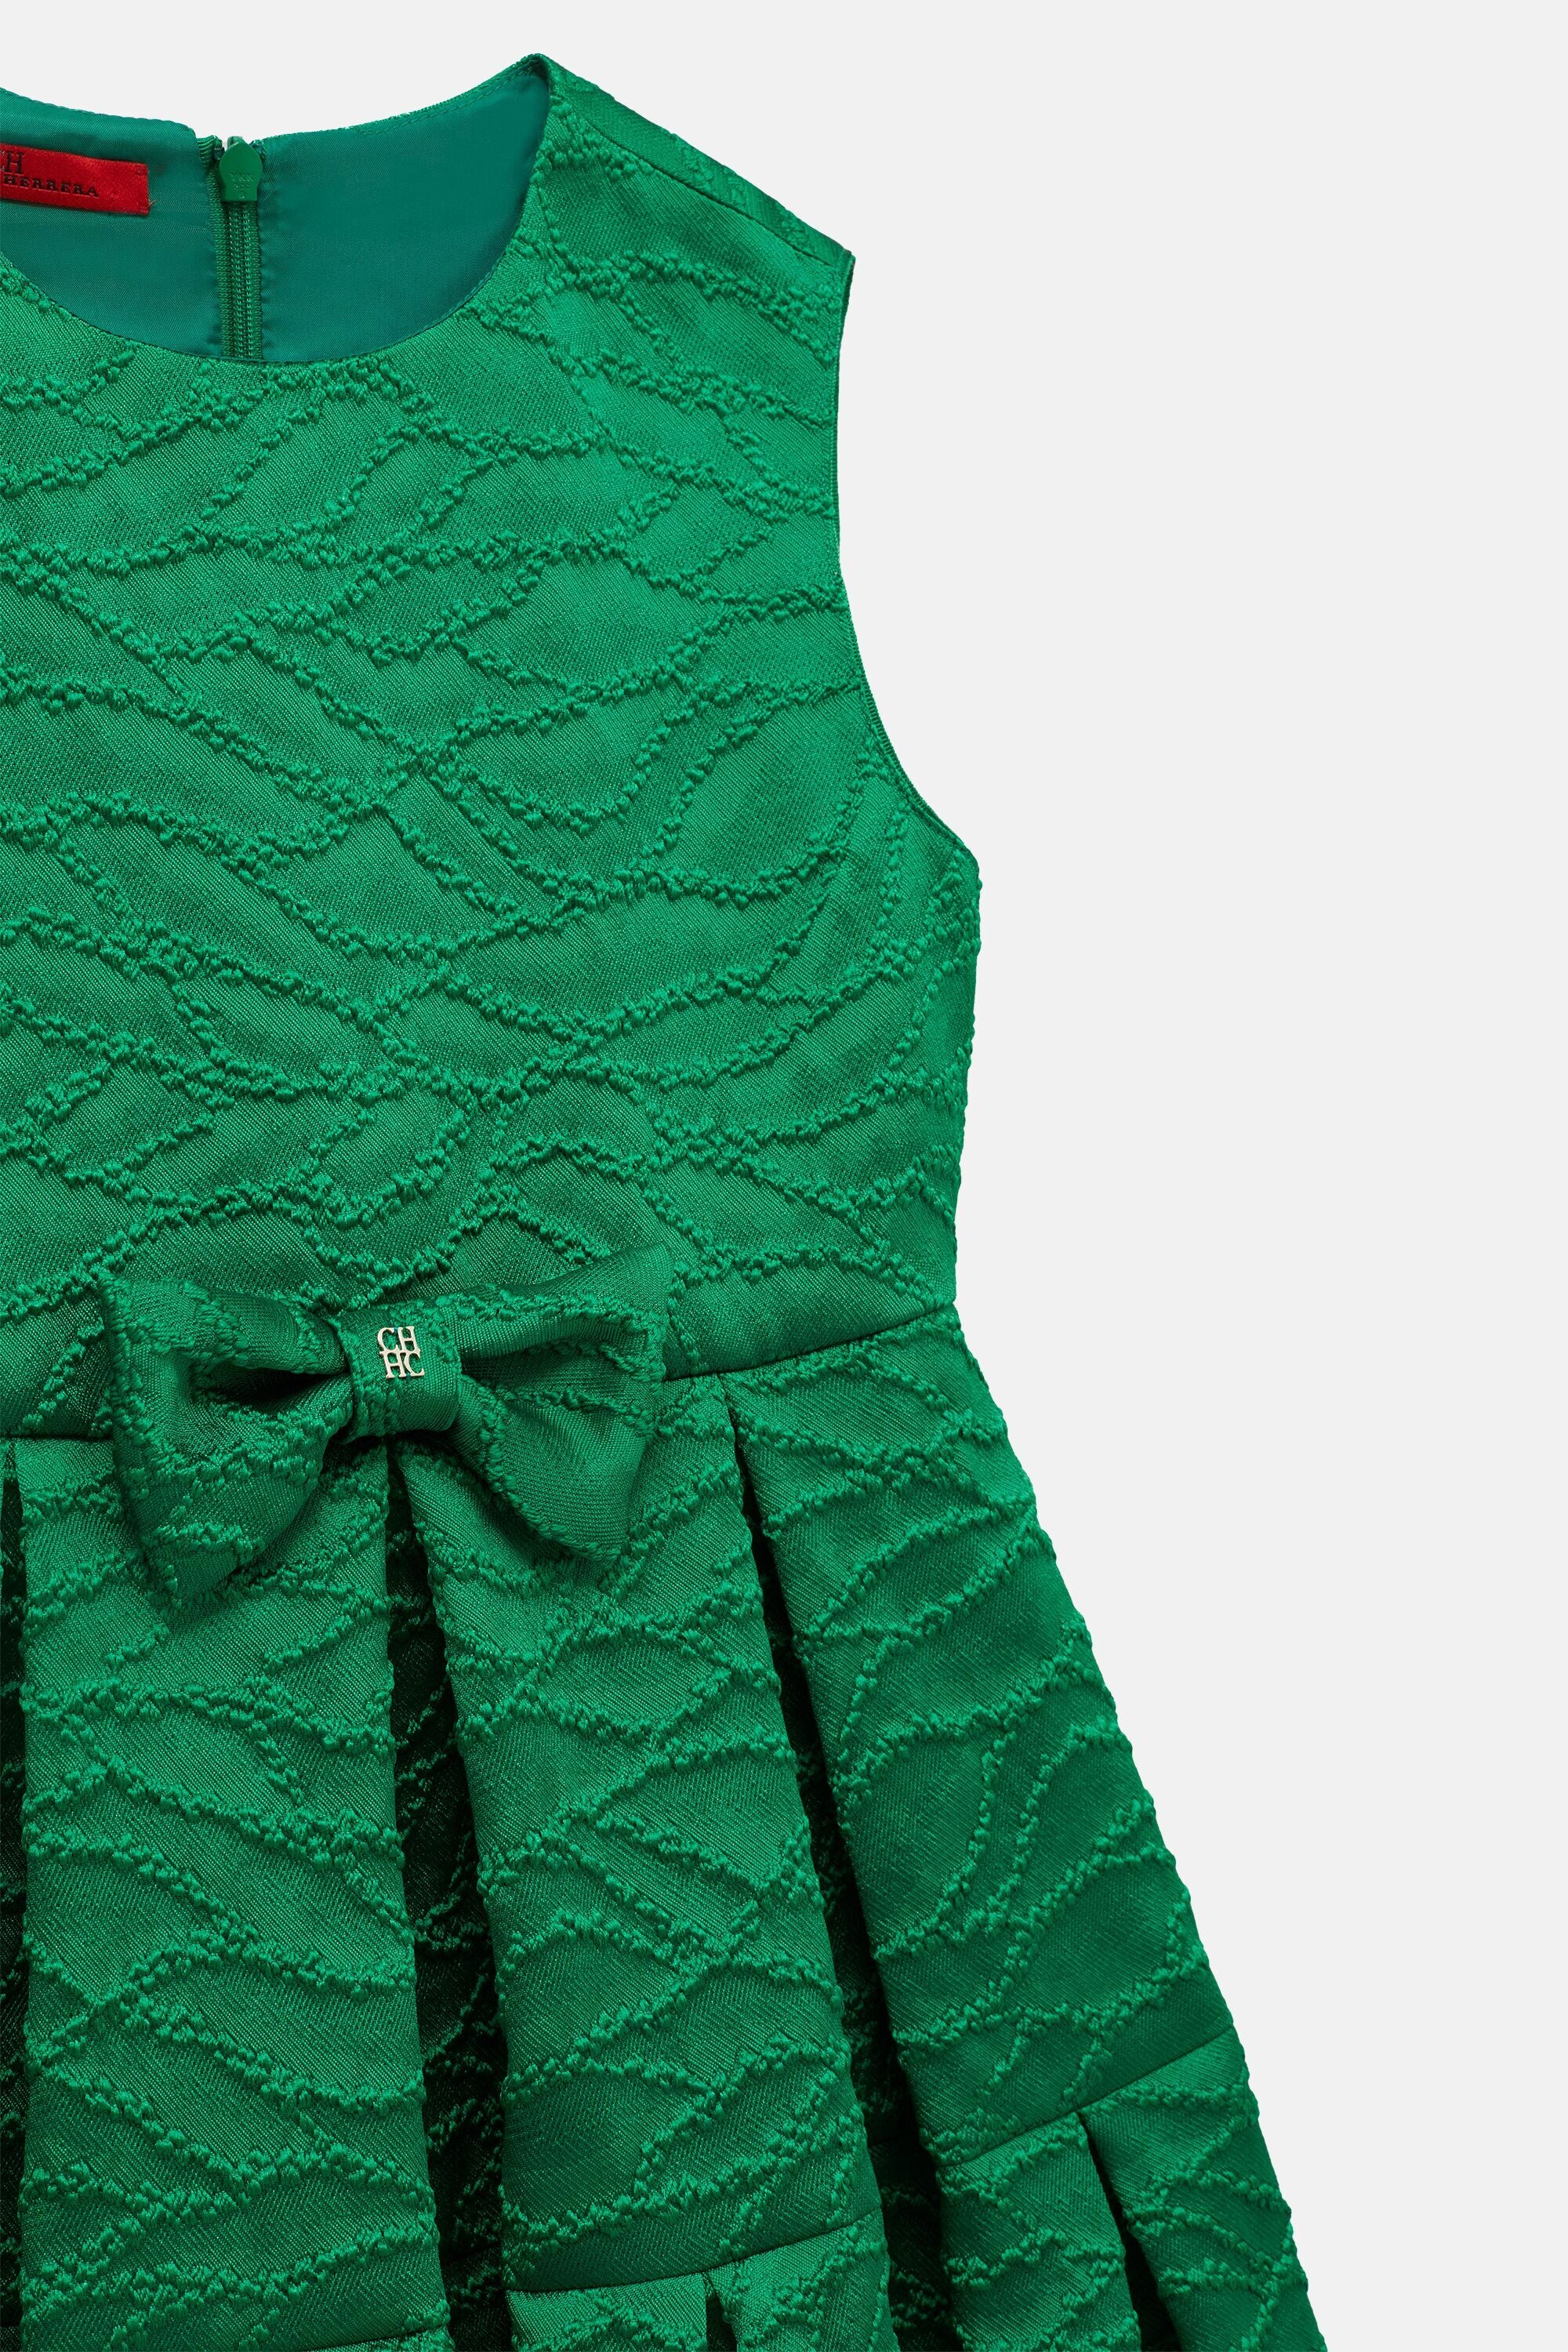 Brocade dress with pleats green - CH ...